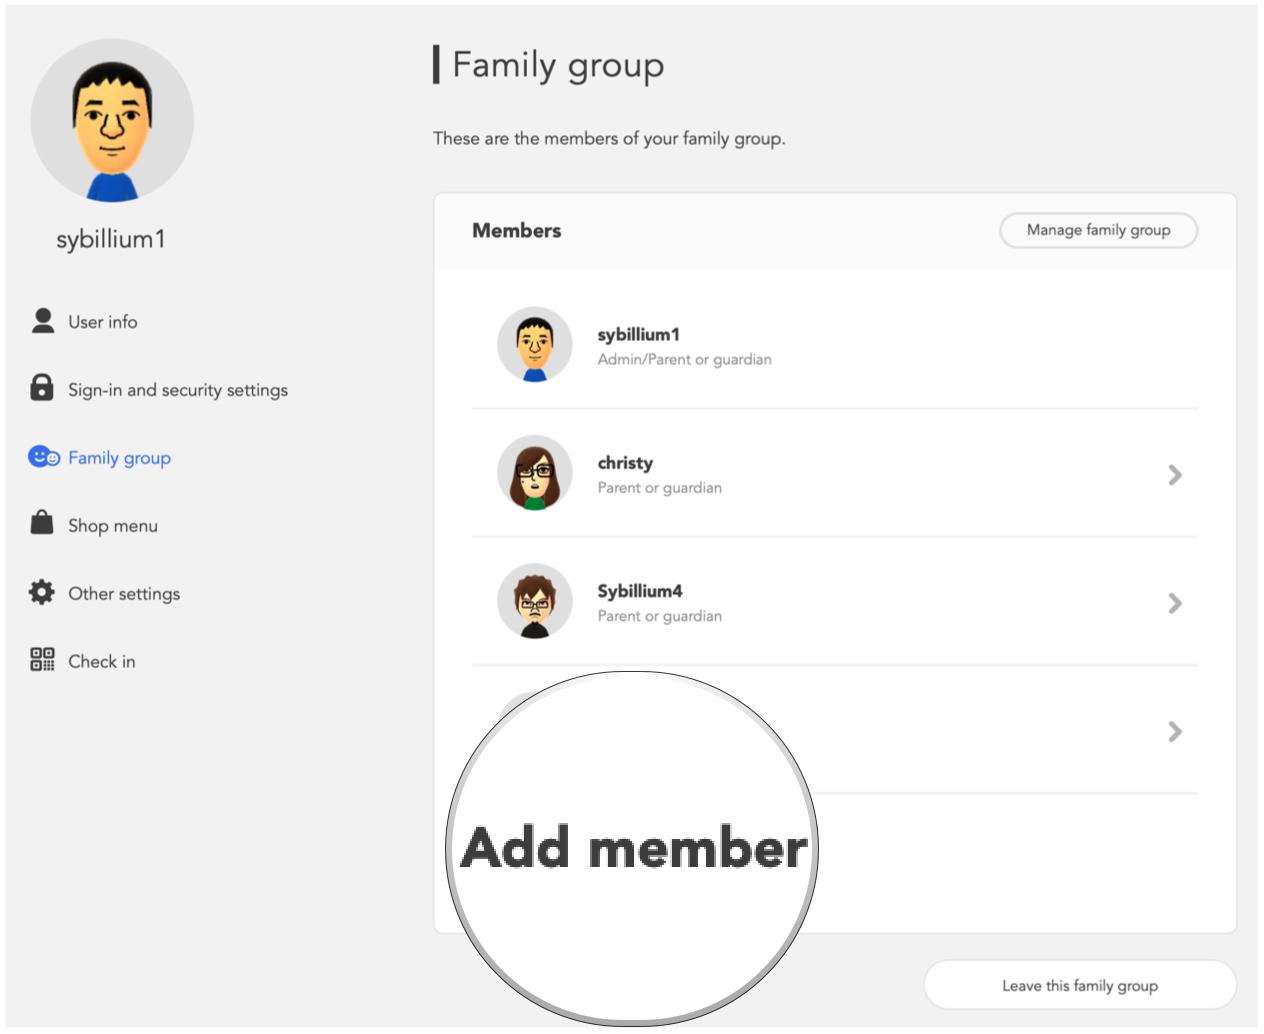 nintendo switch online family sharing